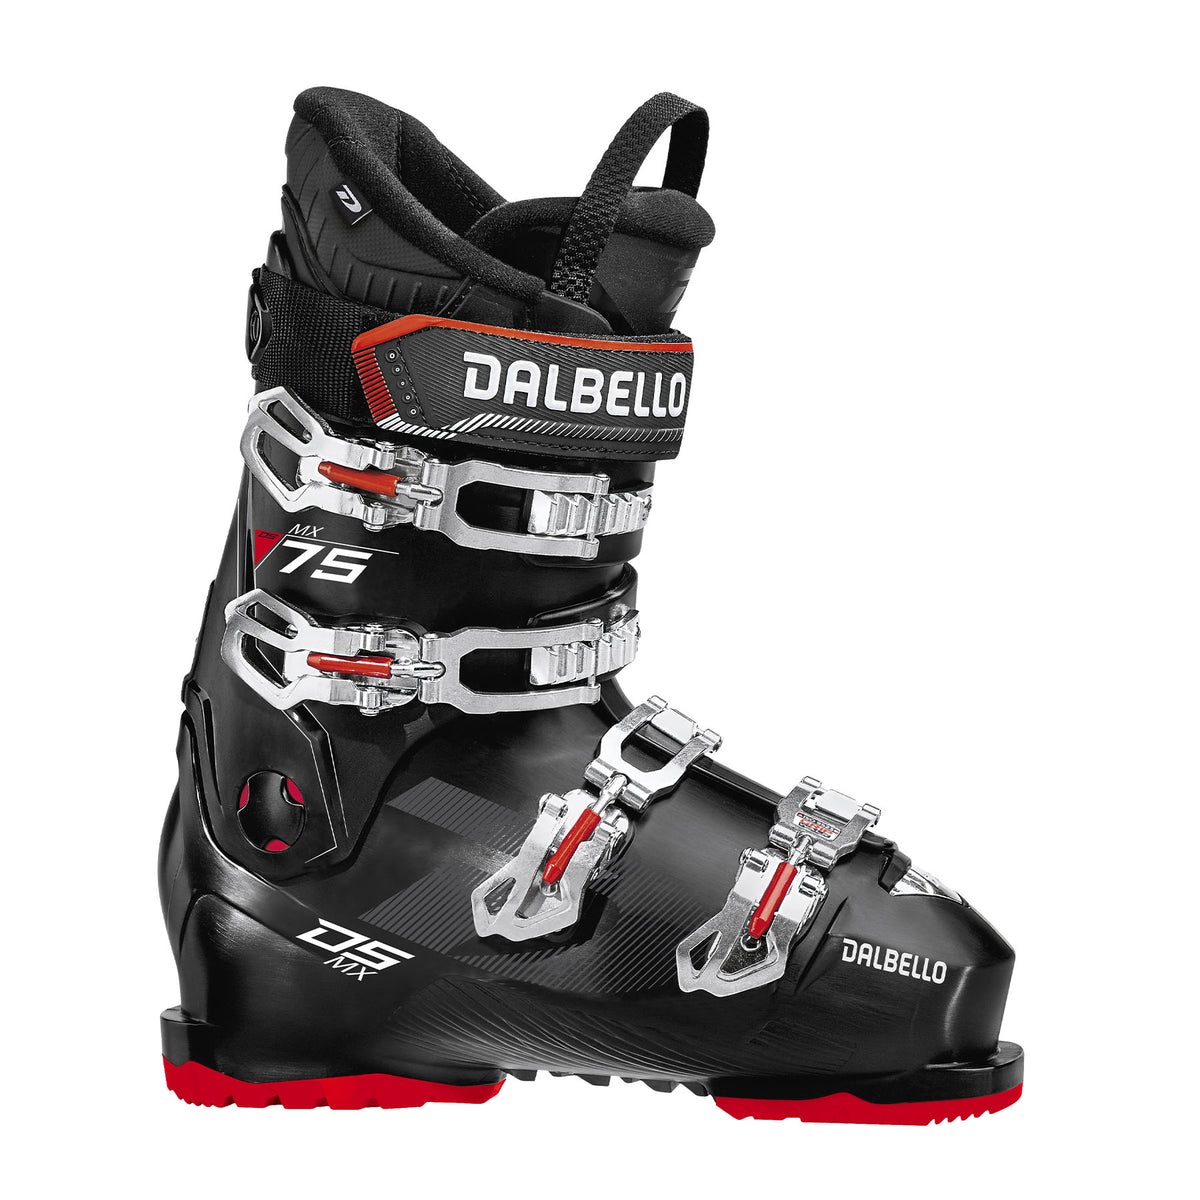 Hero image featuring the Dalbello DS MX 75 ski boot in black with silver buckles and red trim.